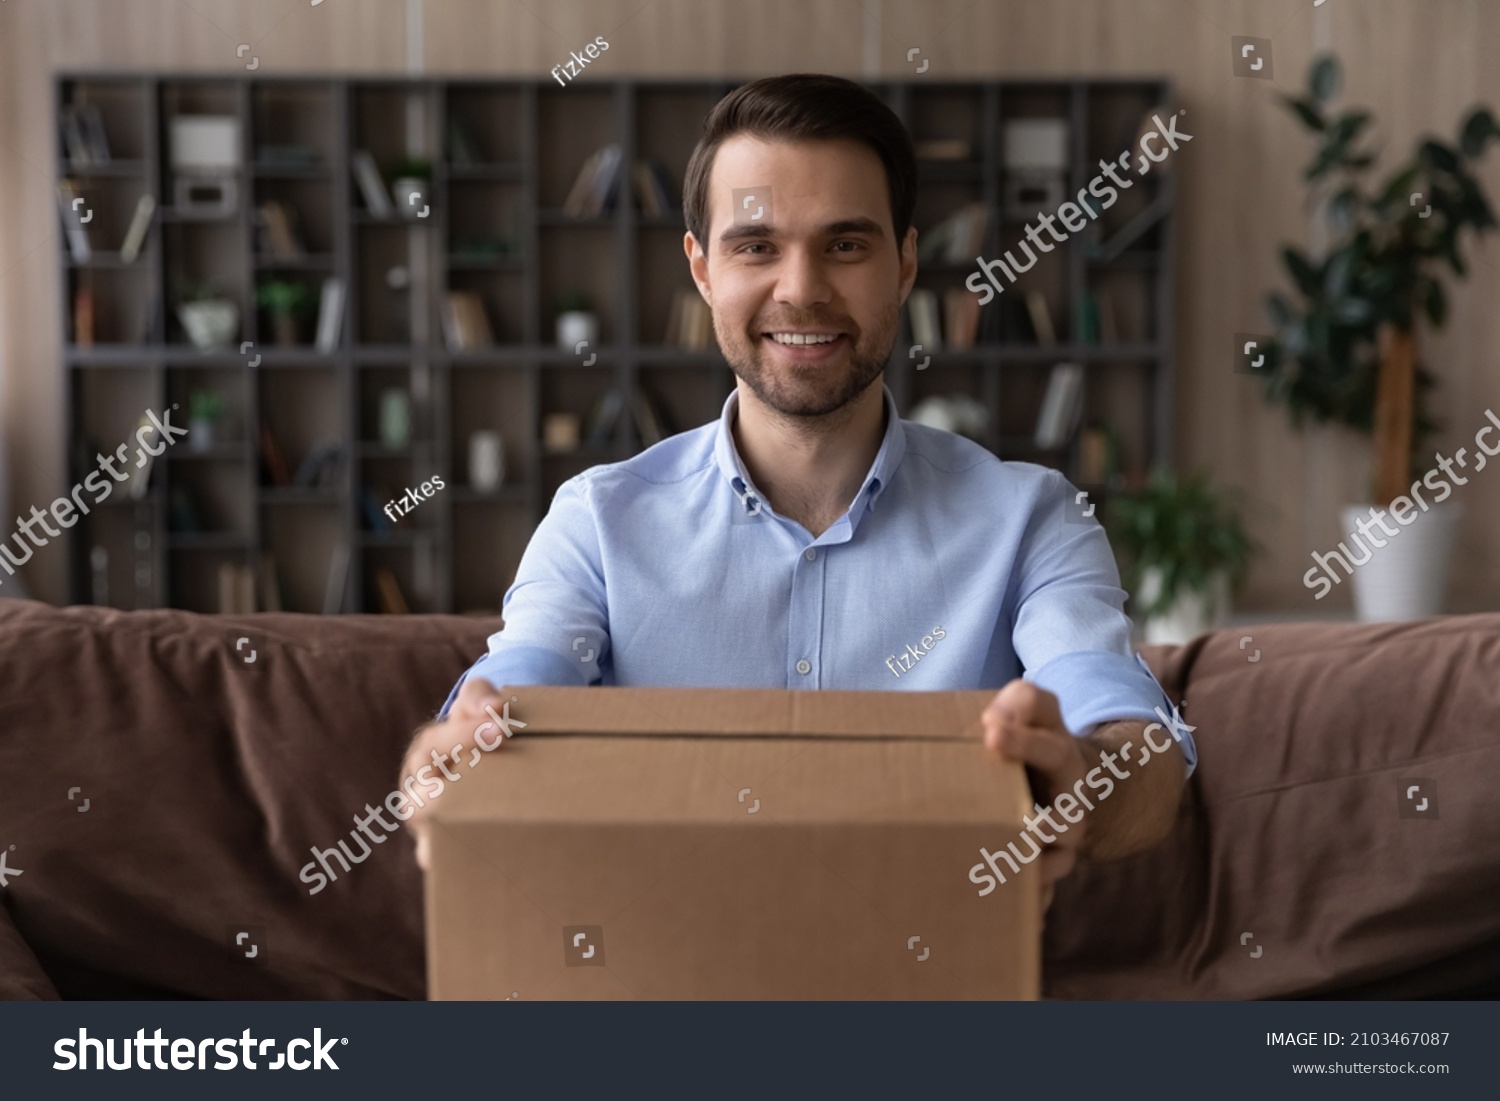 Head shot portrait smiling man holding cardboard box, giving or receiving parcel, sitting on couch at home, happy satisfied customer looking at camera, good delivery service and fast shipping concept #2103467087